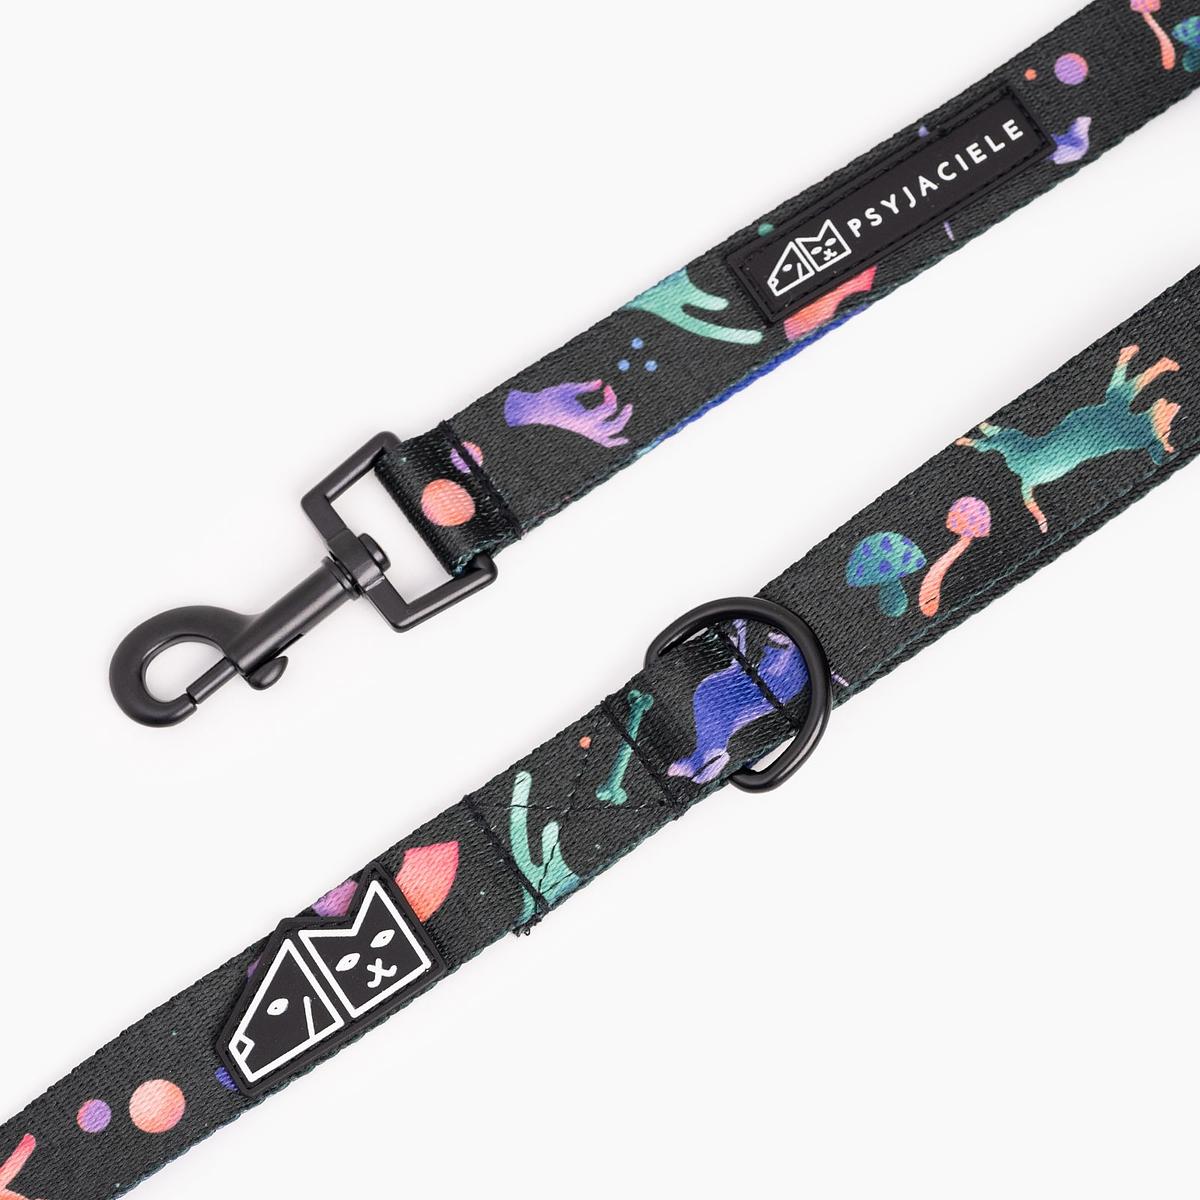 "Psychedelic" city leash